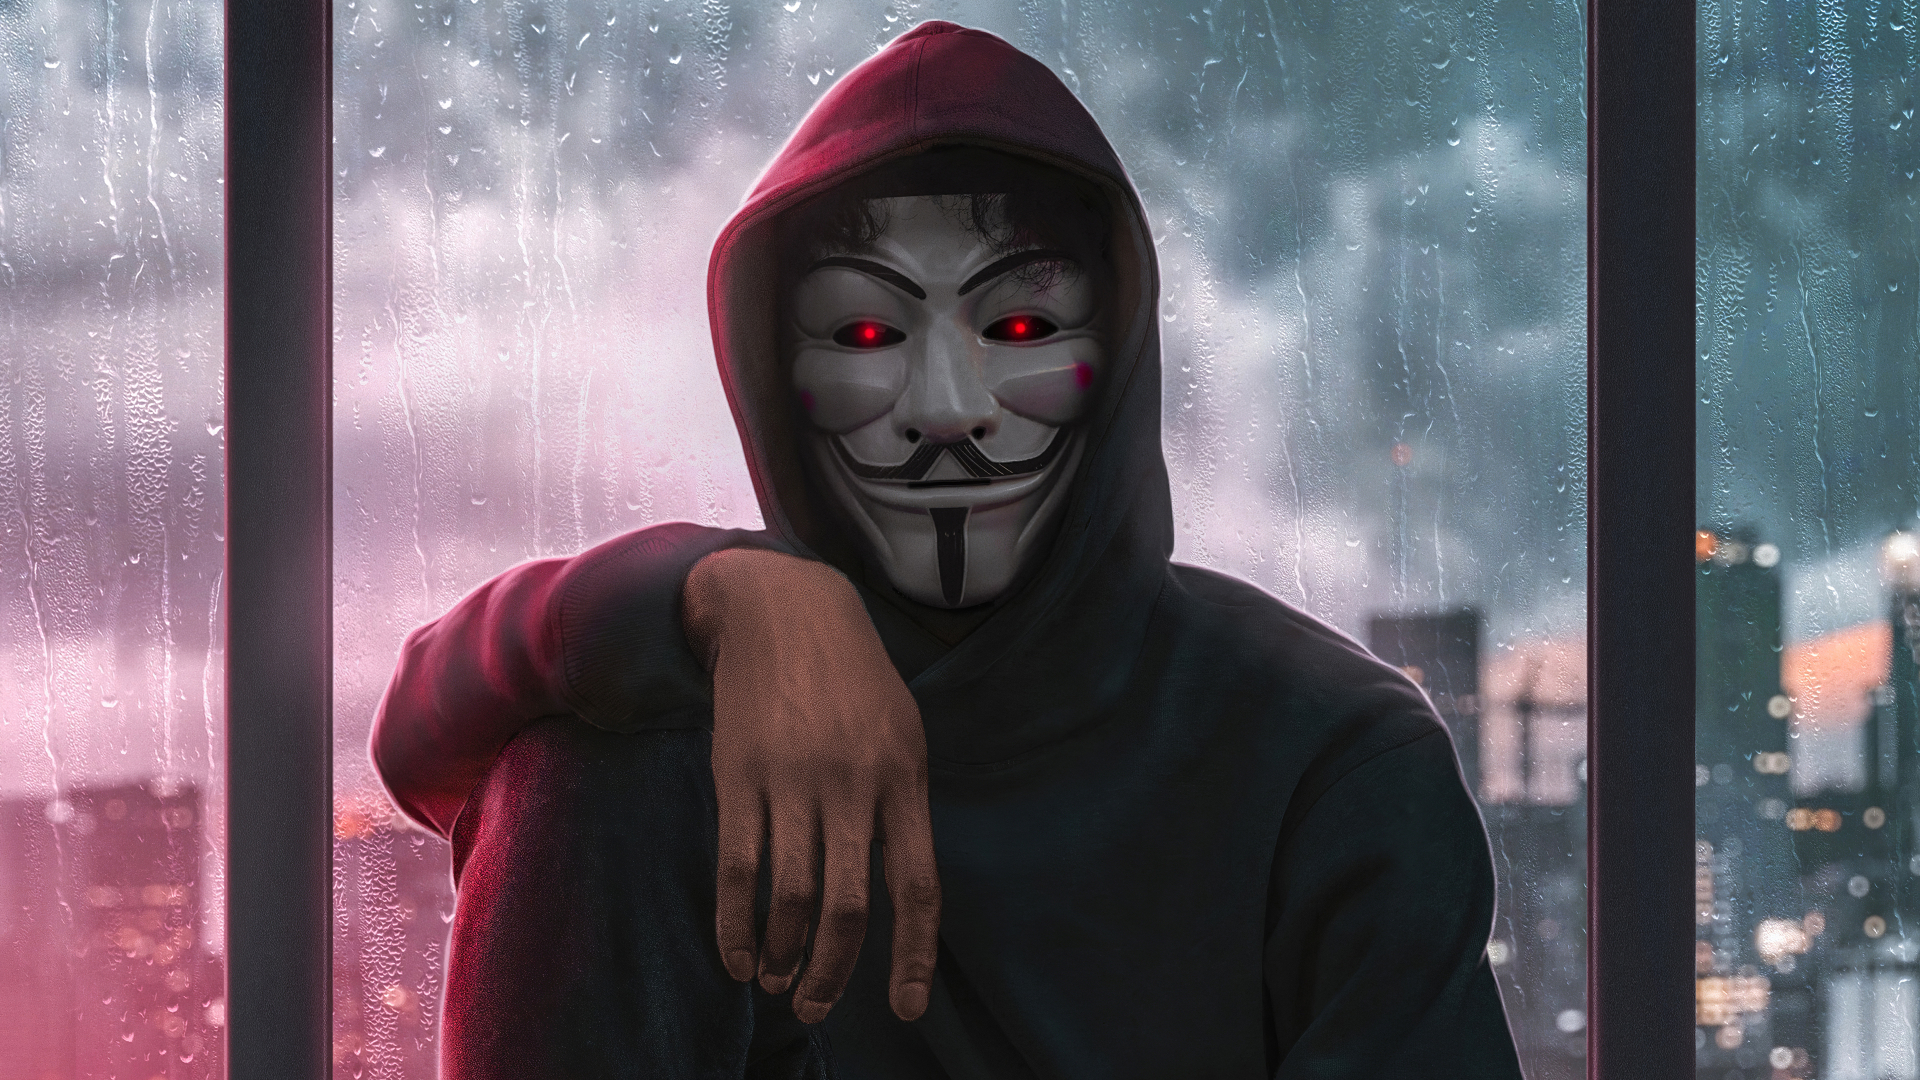 Download wallpaper 1920x1080 anonymous, mask, hood, smoke, person full hd,  hdtv, fhd, 1080p hd background